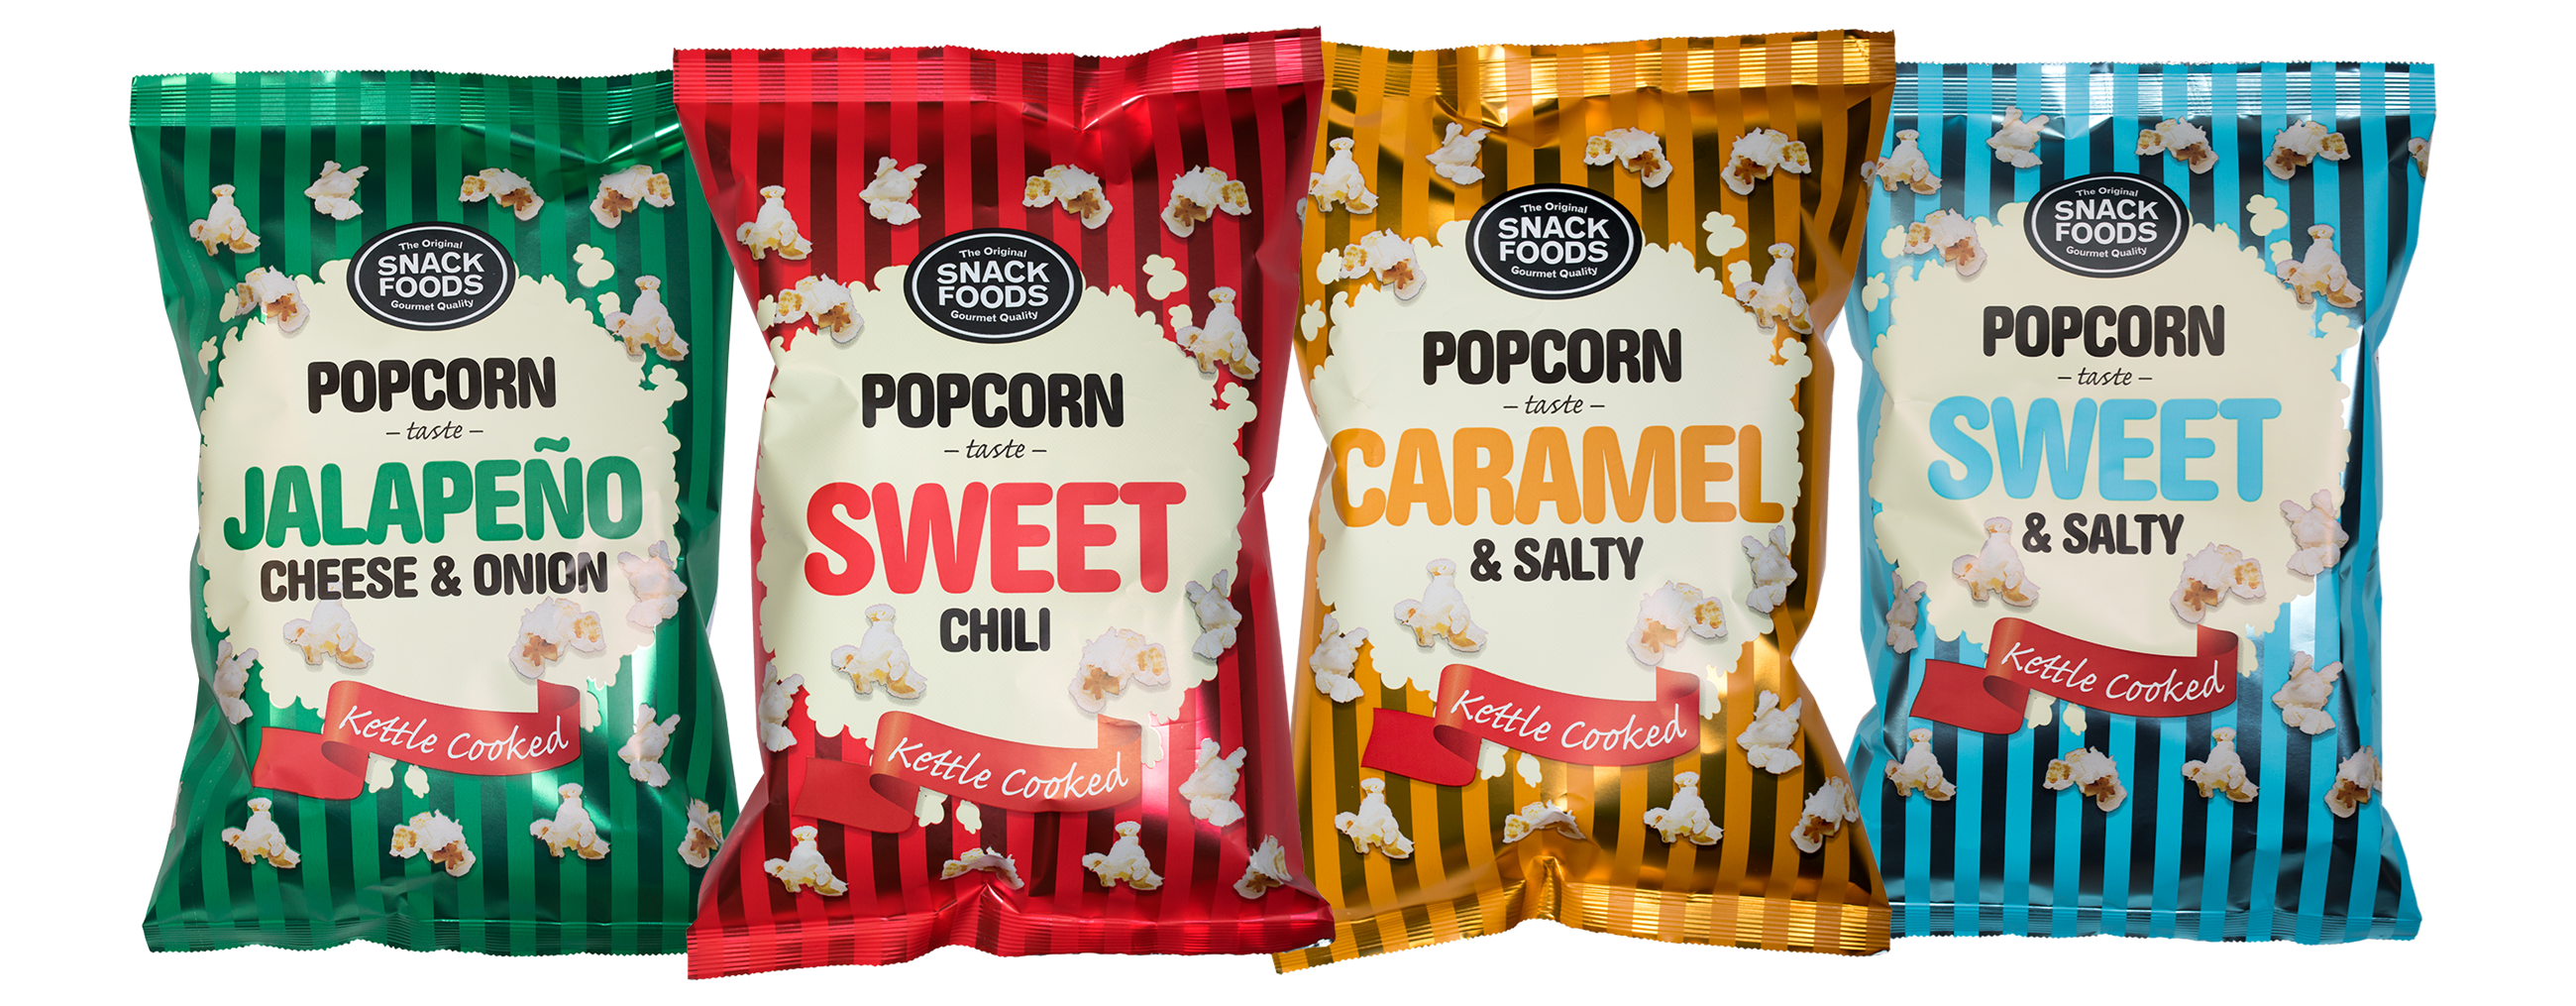 snack-foods-popcorn_pack-all2